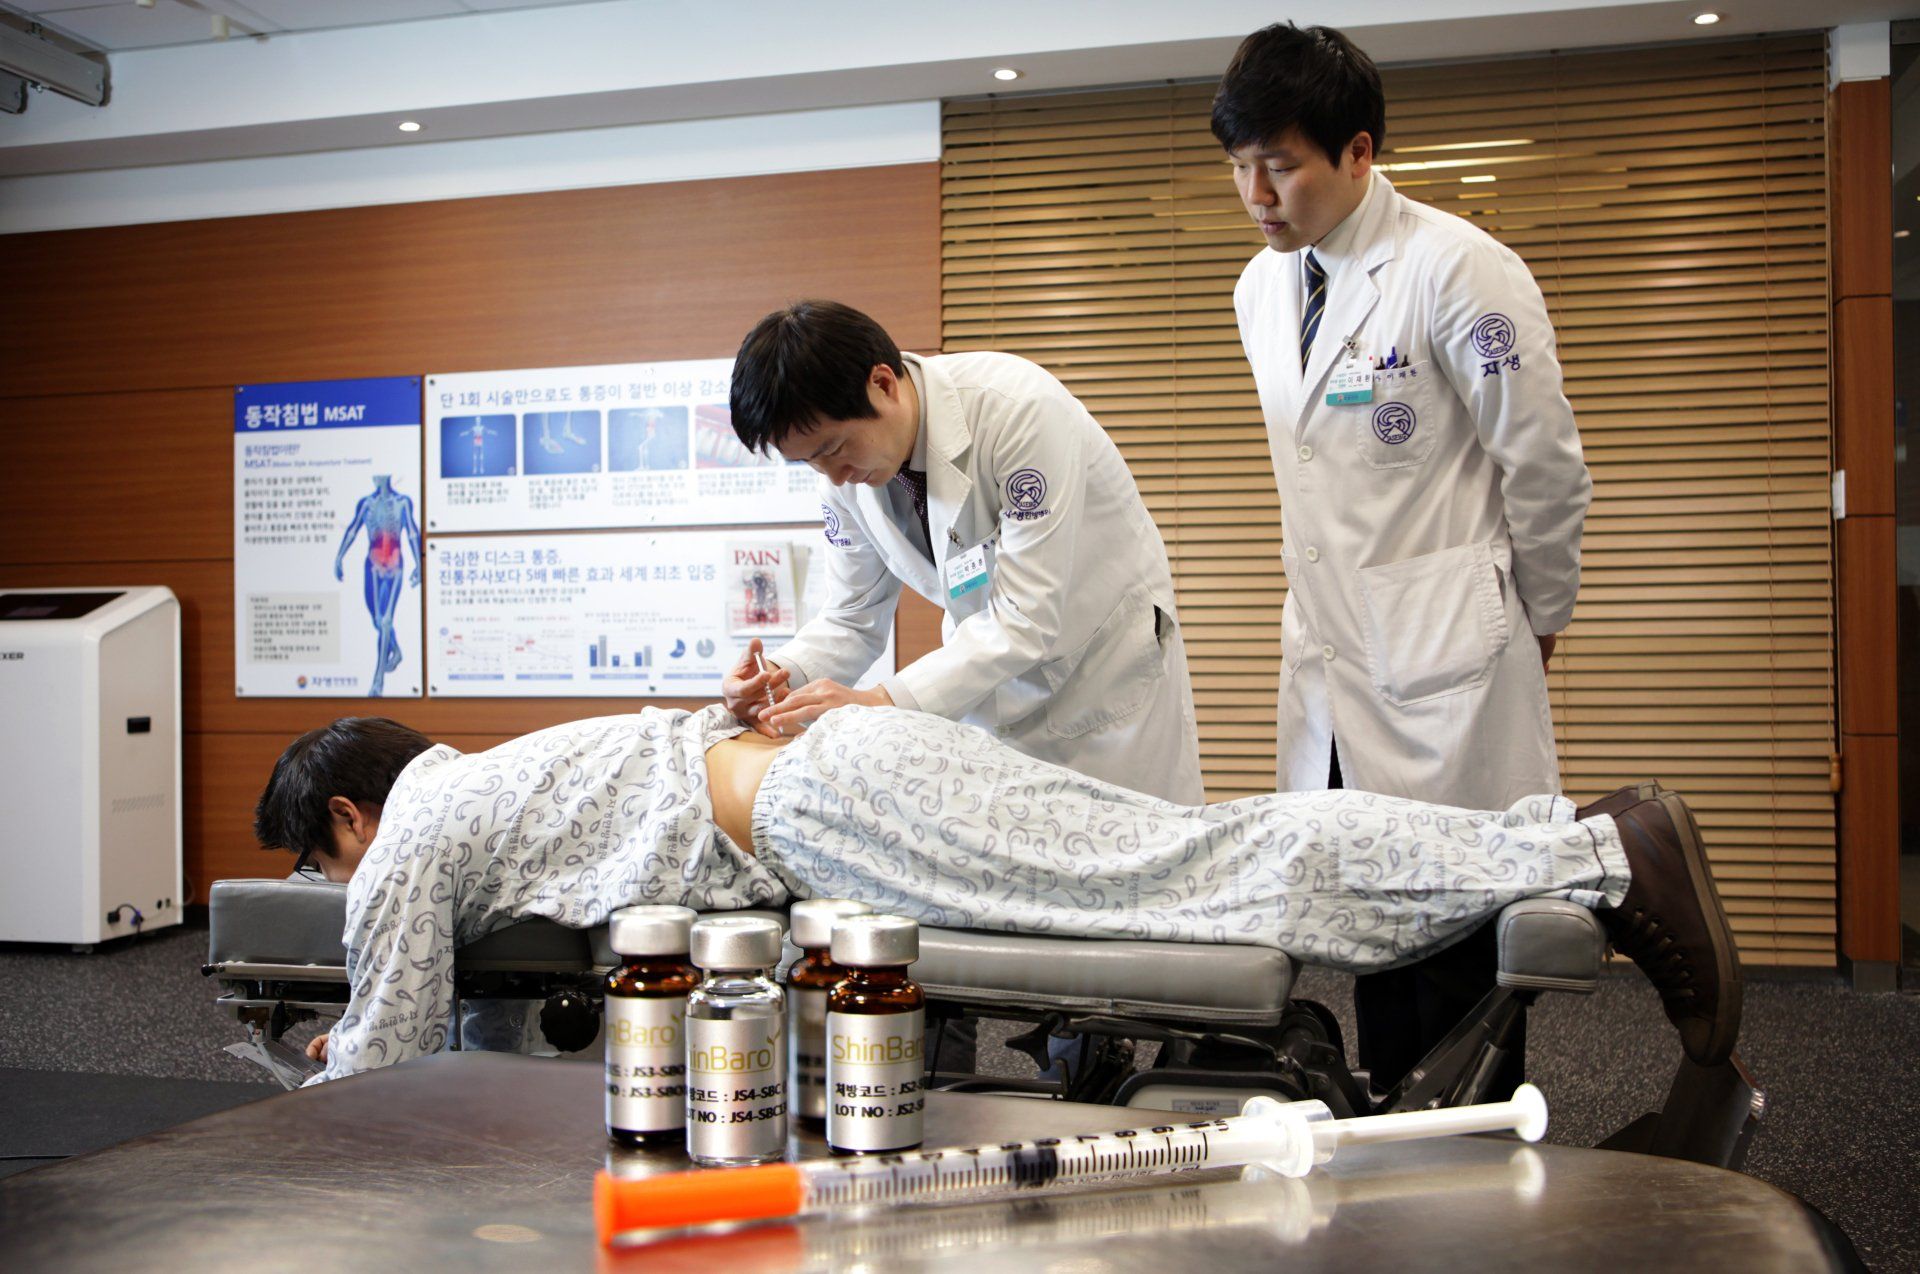 Most patients non-surgically treated for their spinal conditions: Jaseng Hospital of Korean Medicine sets world record